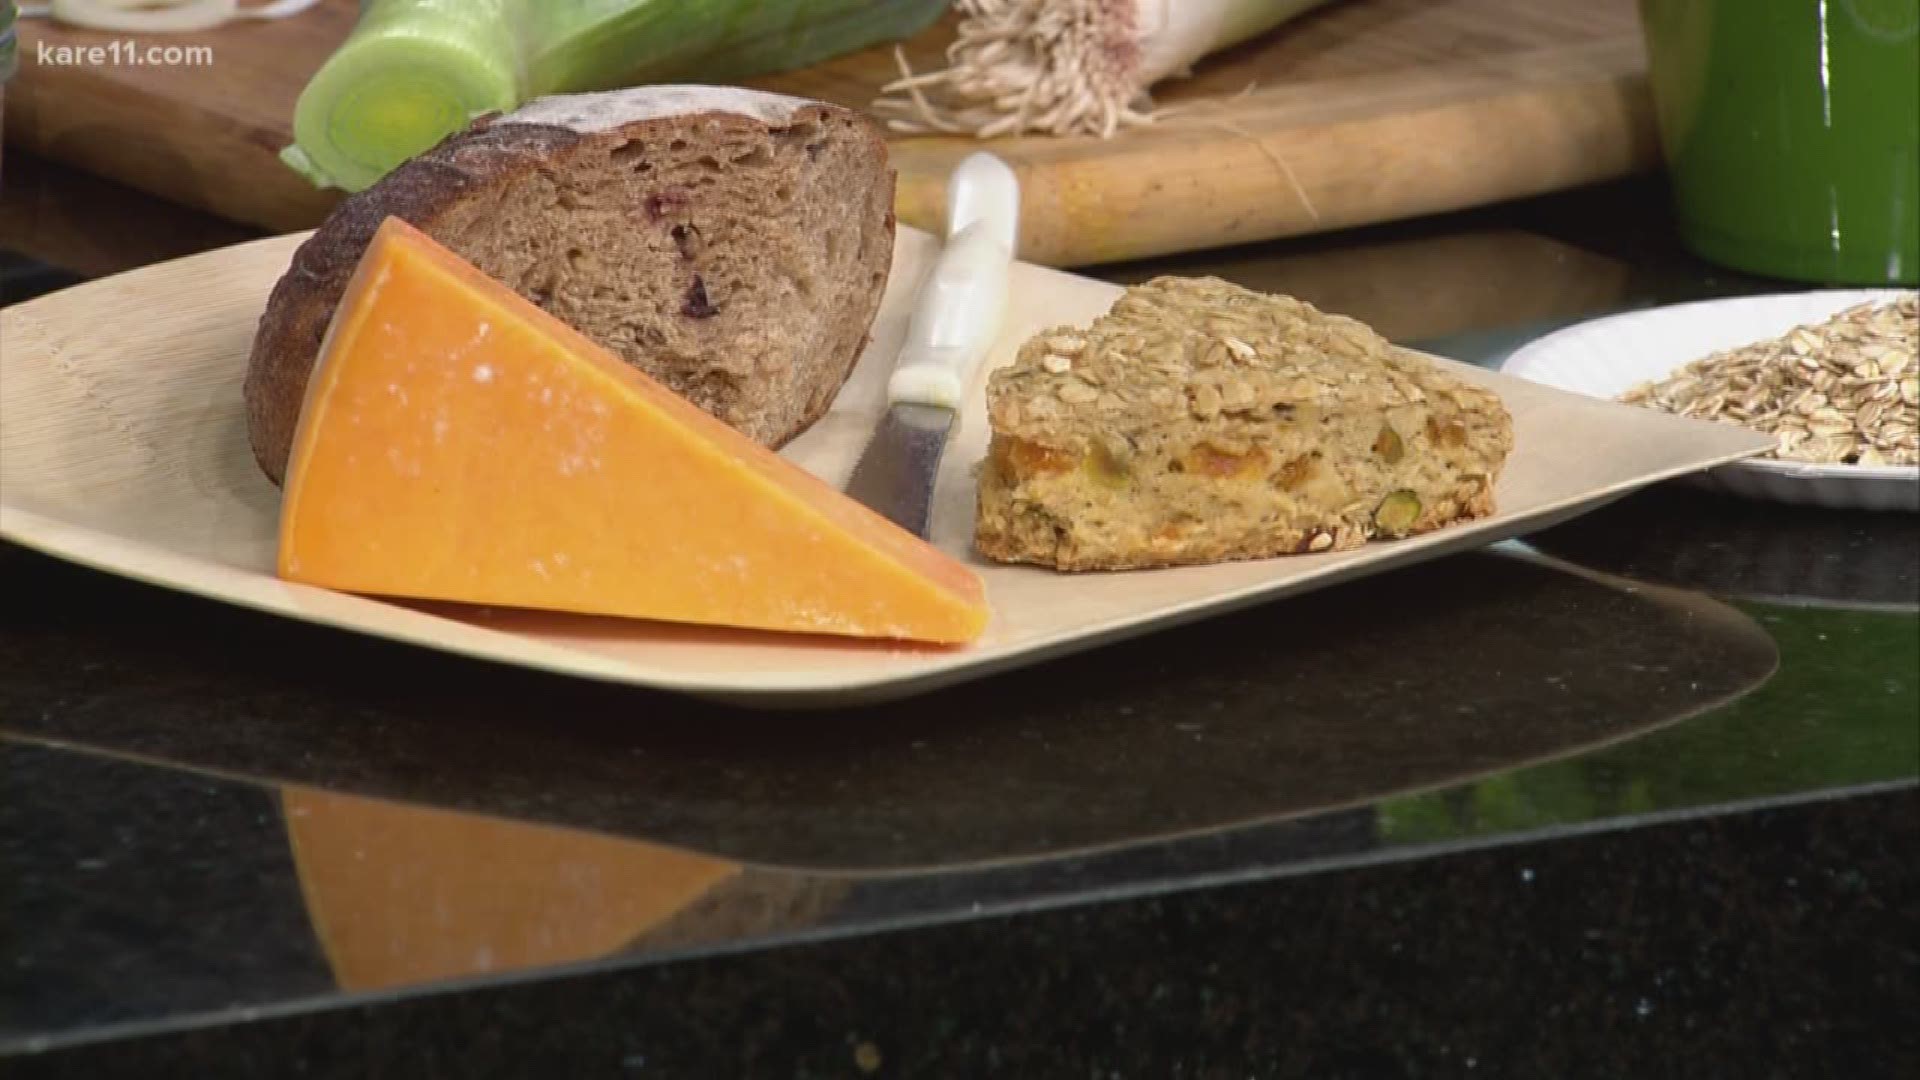 James Beard Award winning cookbook author and chef Beth Dooley joined us with a simple and tasty recipe to help celebrate St. Patrick's Day.